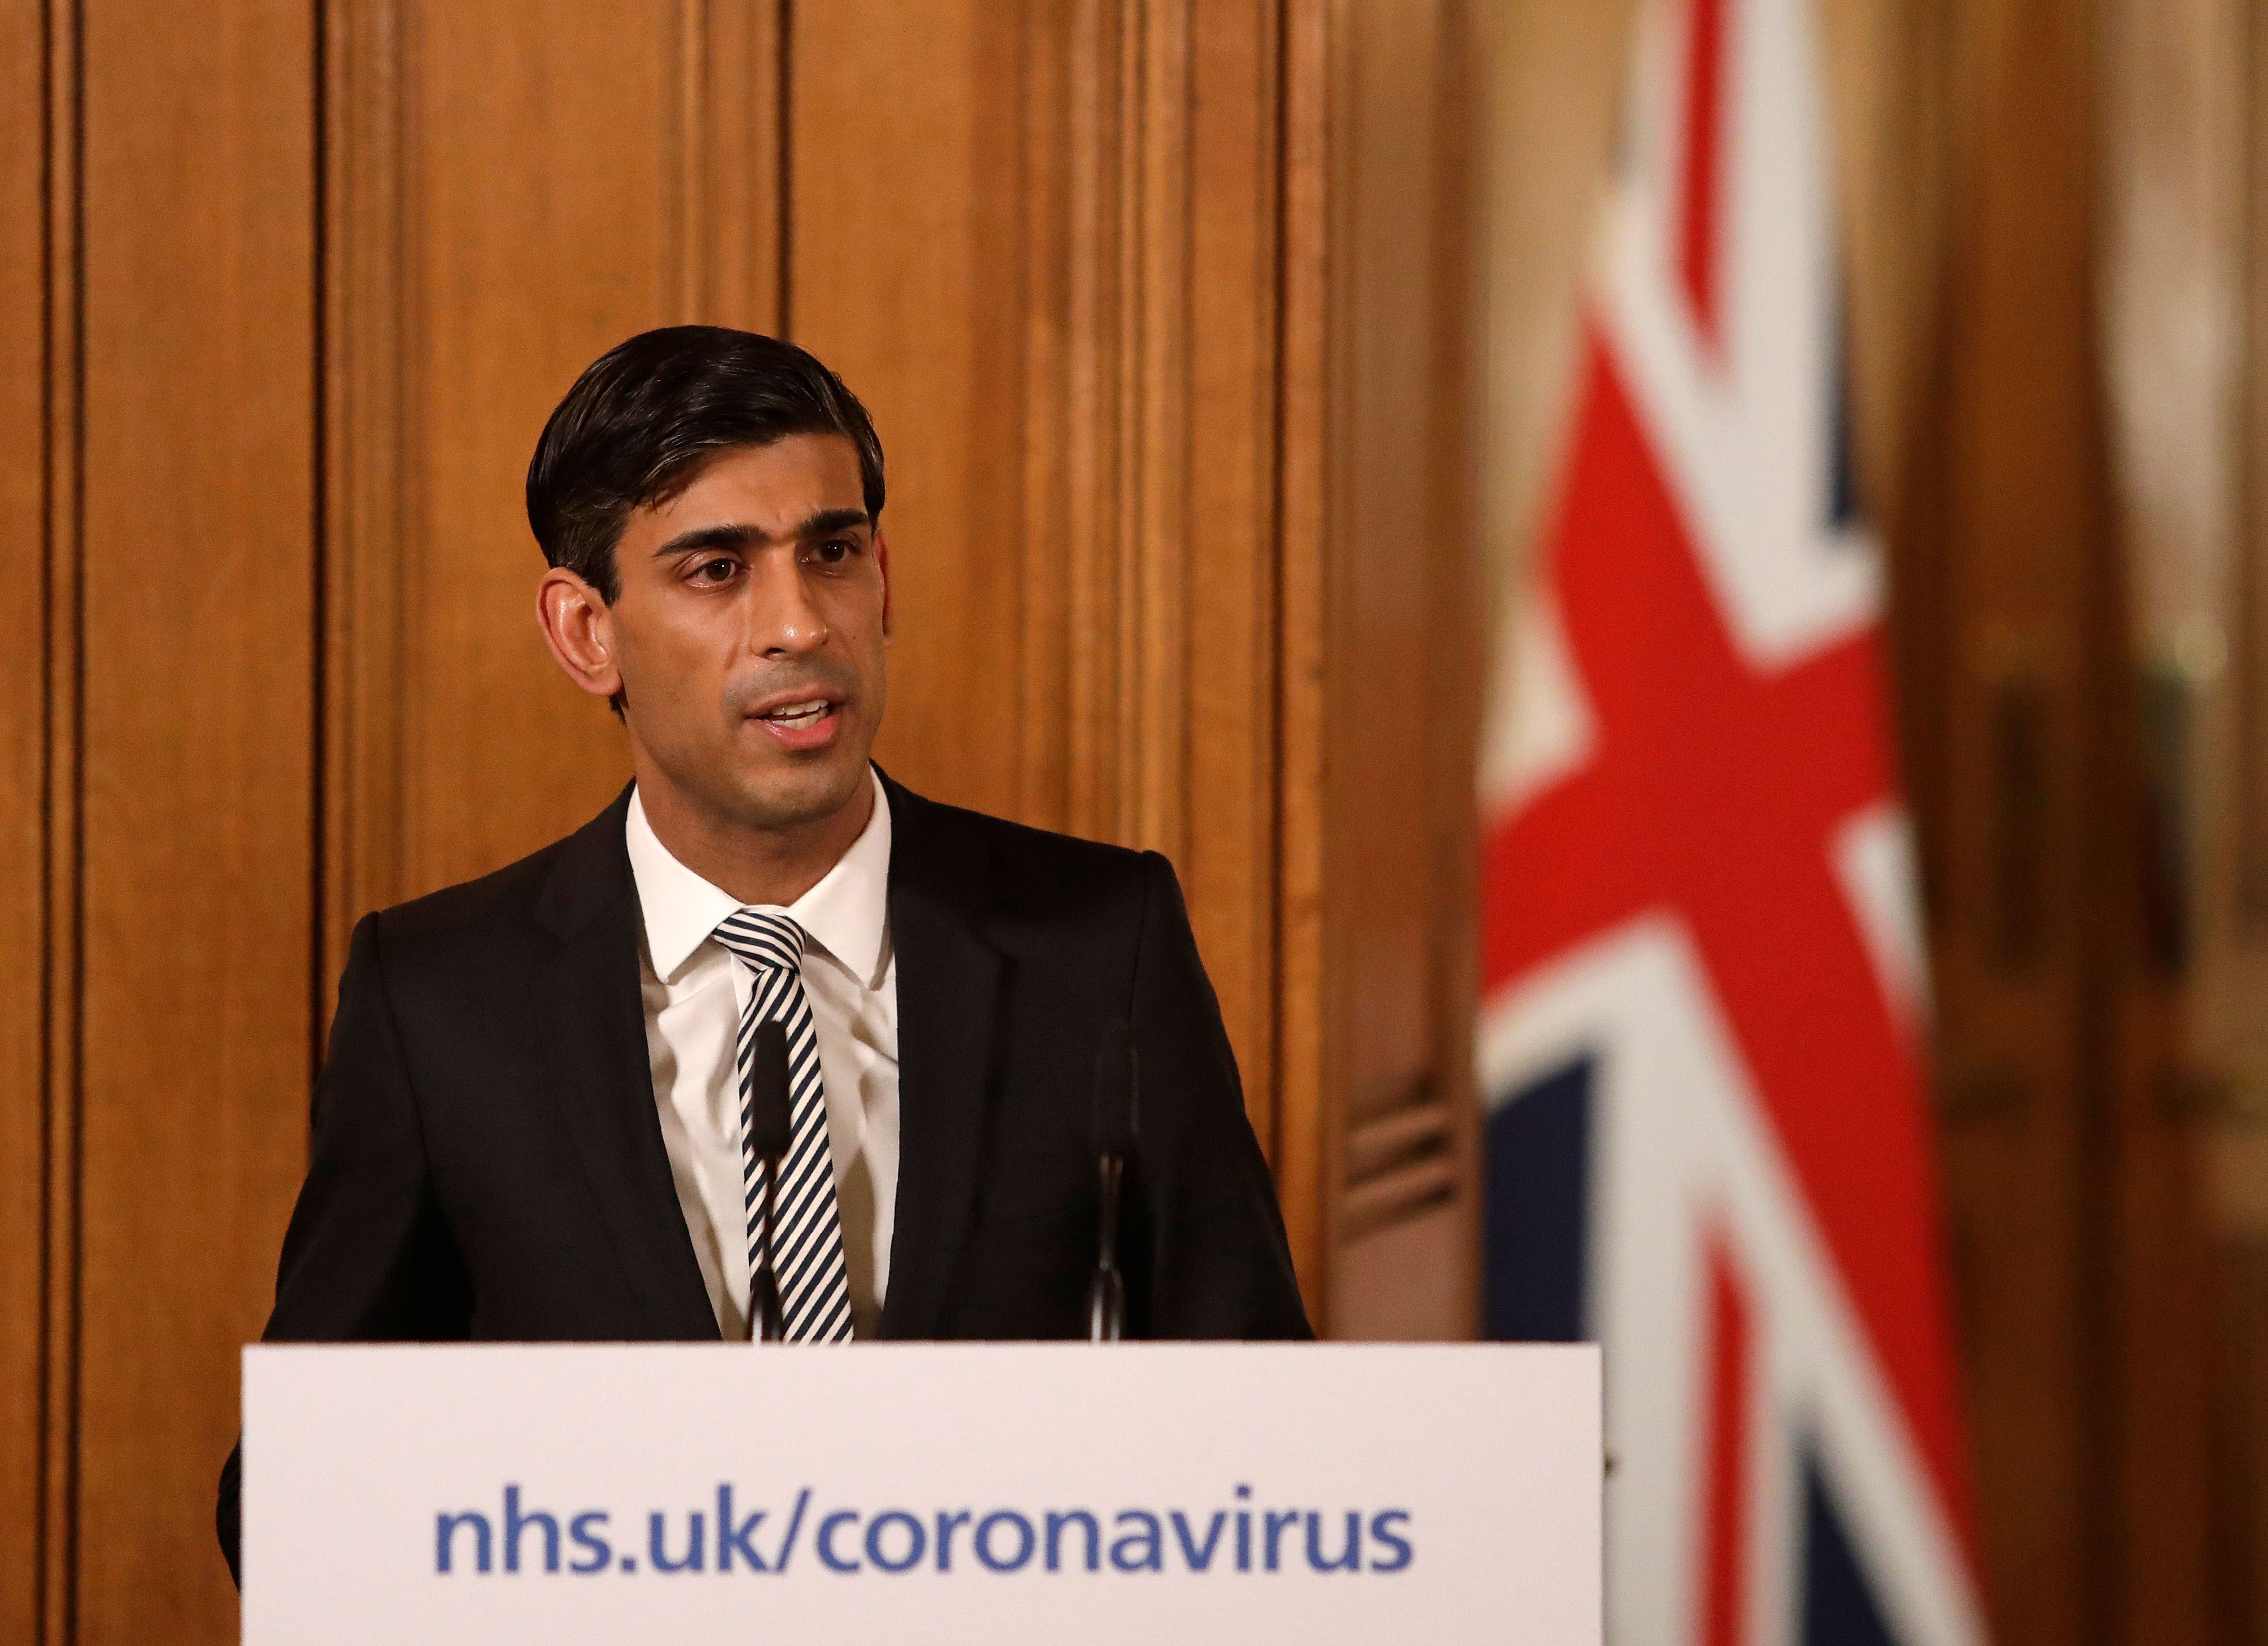 Rishi Sunak, UK finance minister, speaks at a press conference in London on March 17.